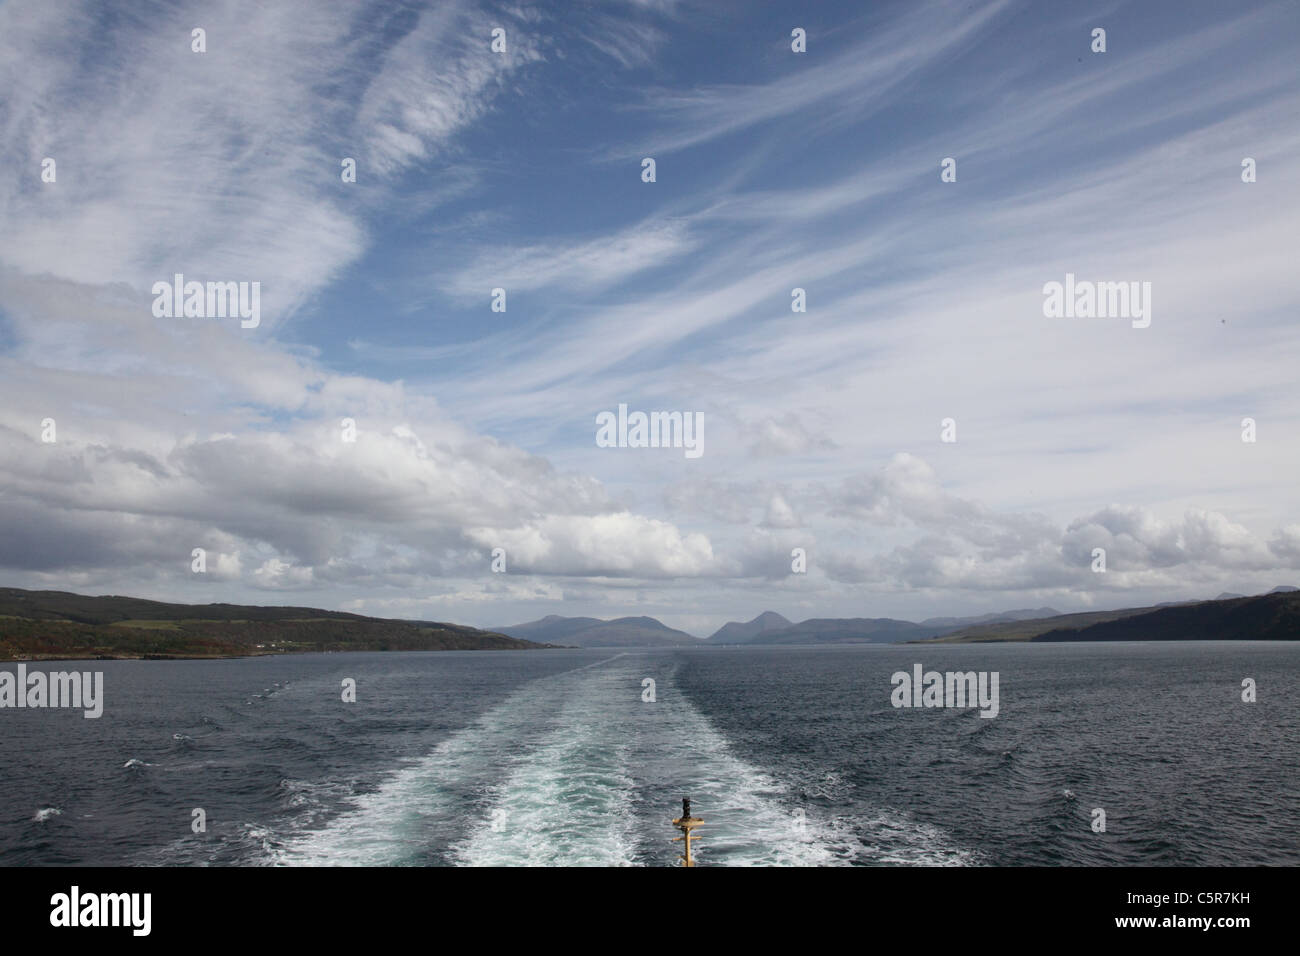 Sea scape showing clouds seen against a blue sky, with wake of ship in foreground. Photo taken  from Hebridean Ferry Stock Photo